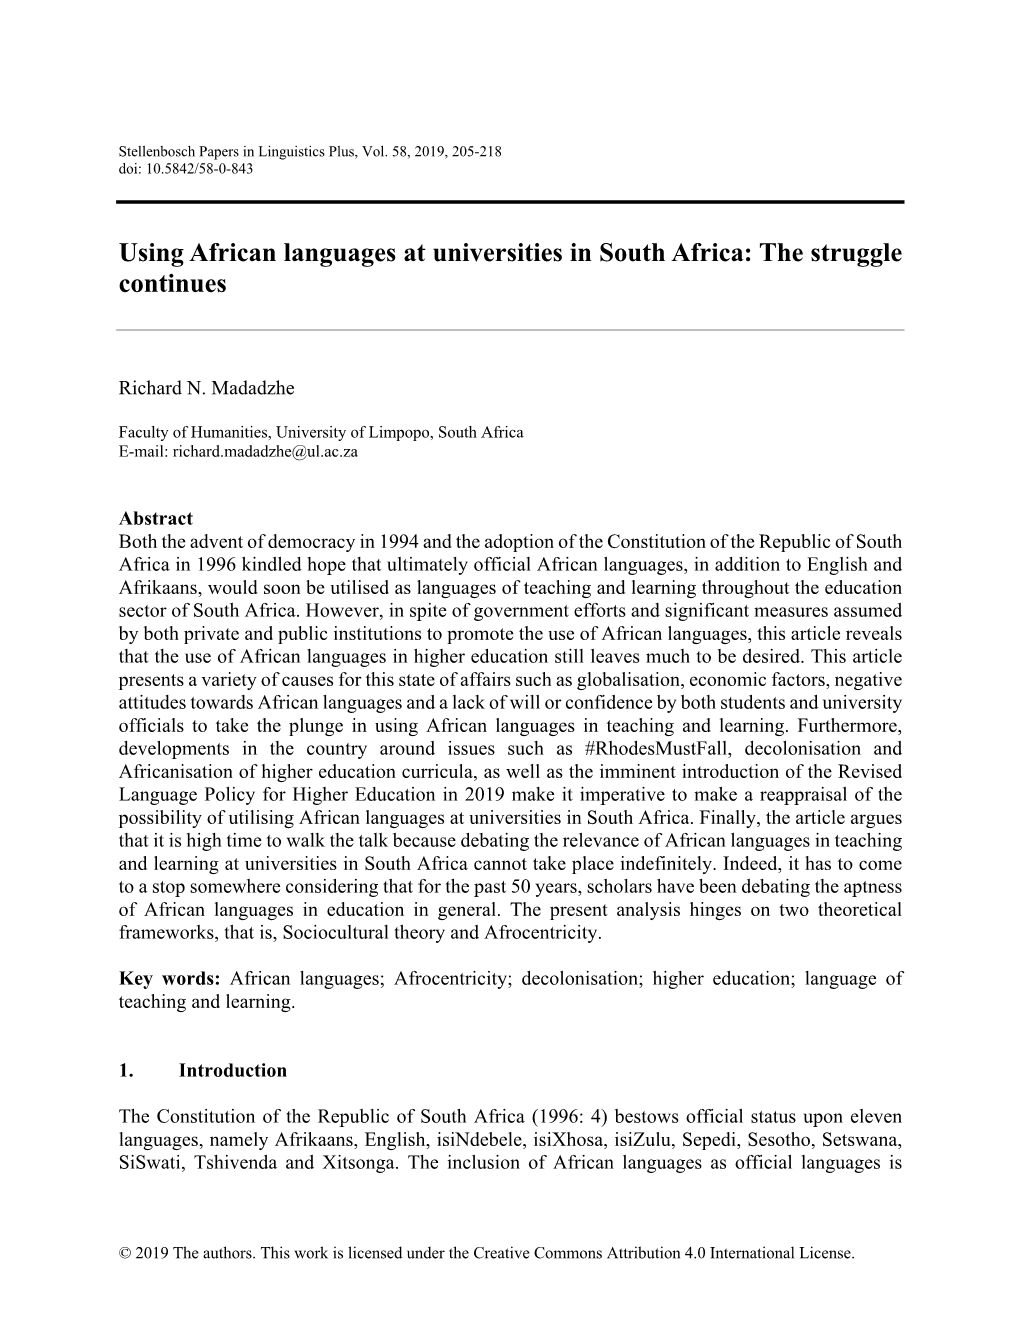 Using African Languages at Universities in South Africa: the Struggle Continues